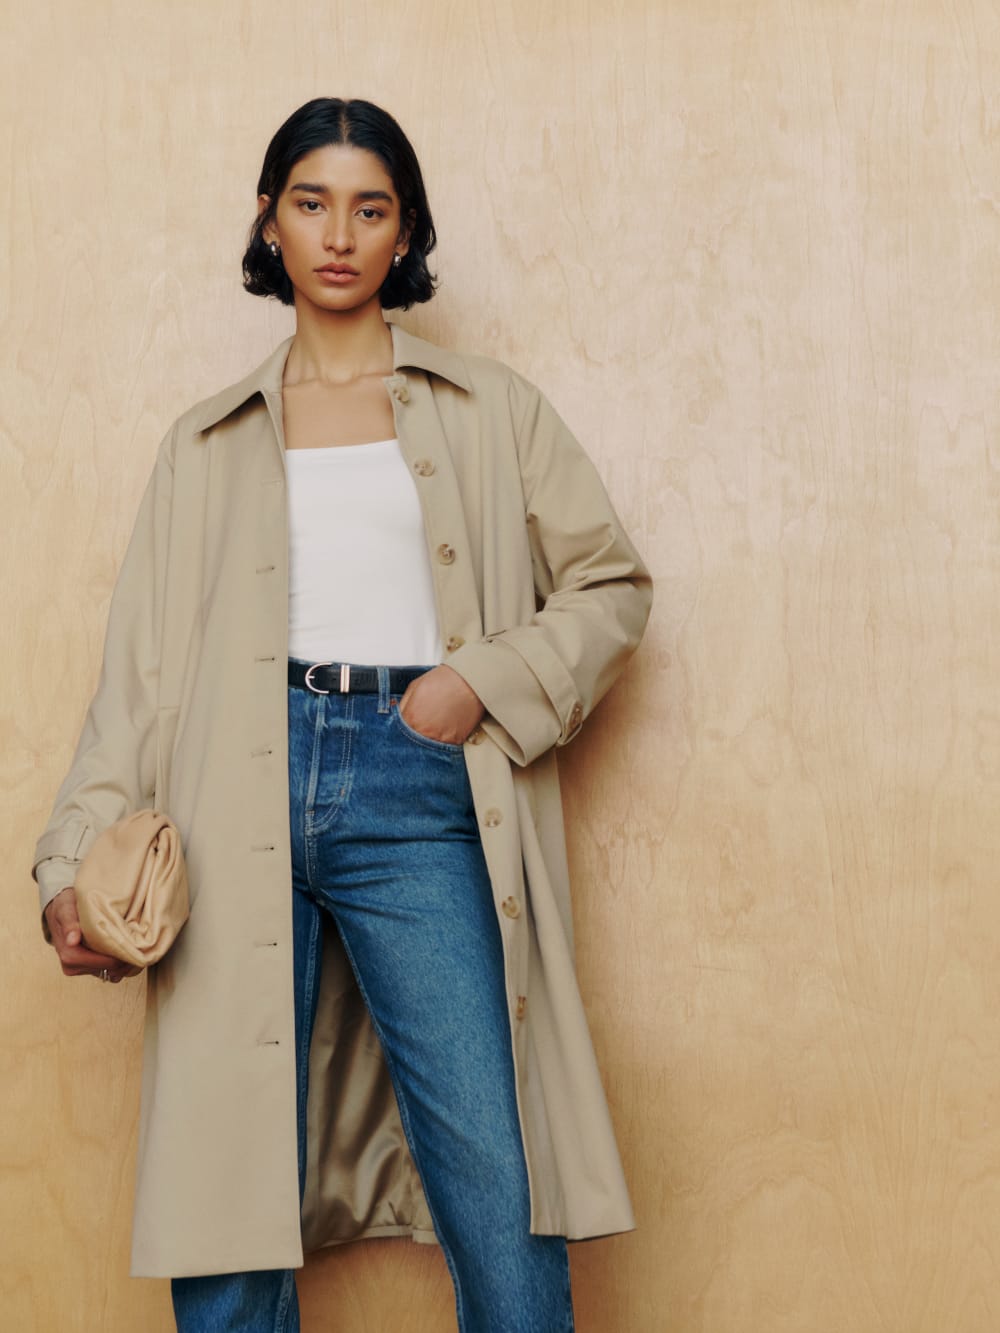 Reformation Danni Oversized Trench Coat in Beige. Designed to be oversized and relaxed fit throughout. Single breasted button fastening. 